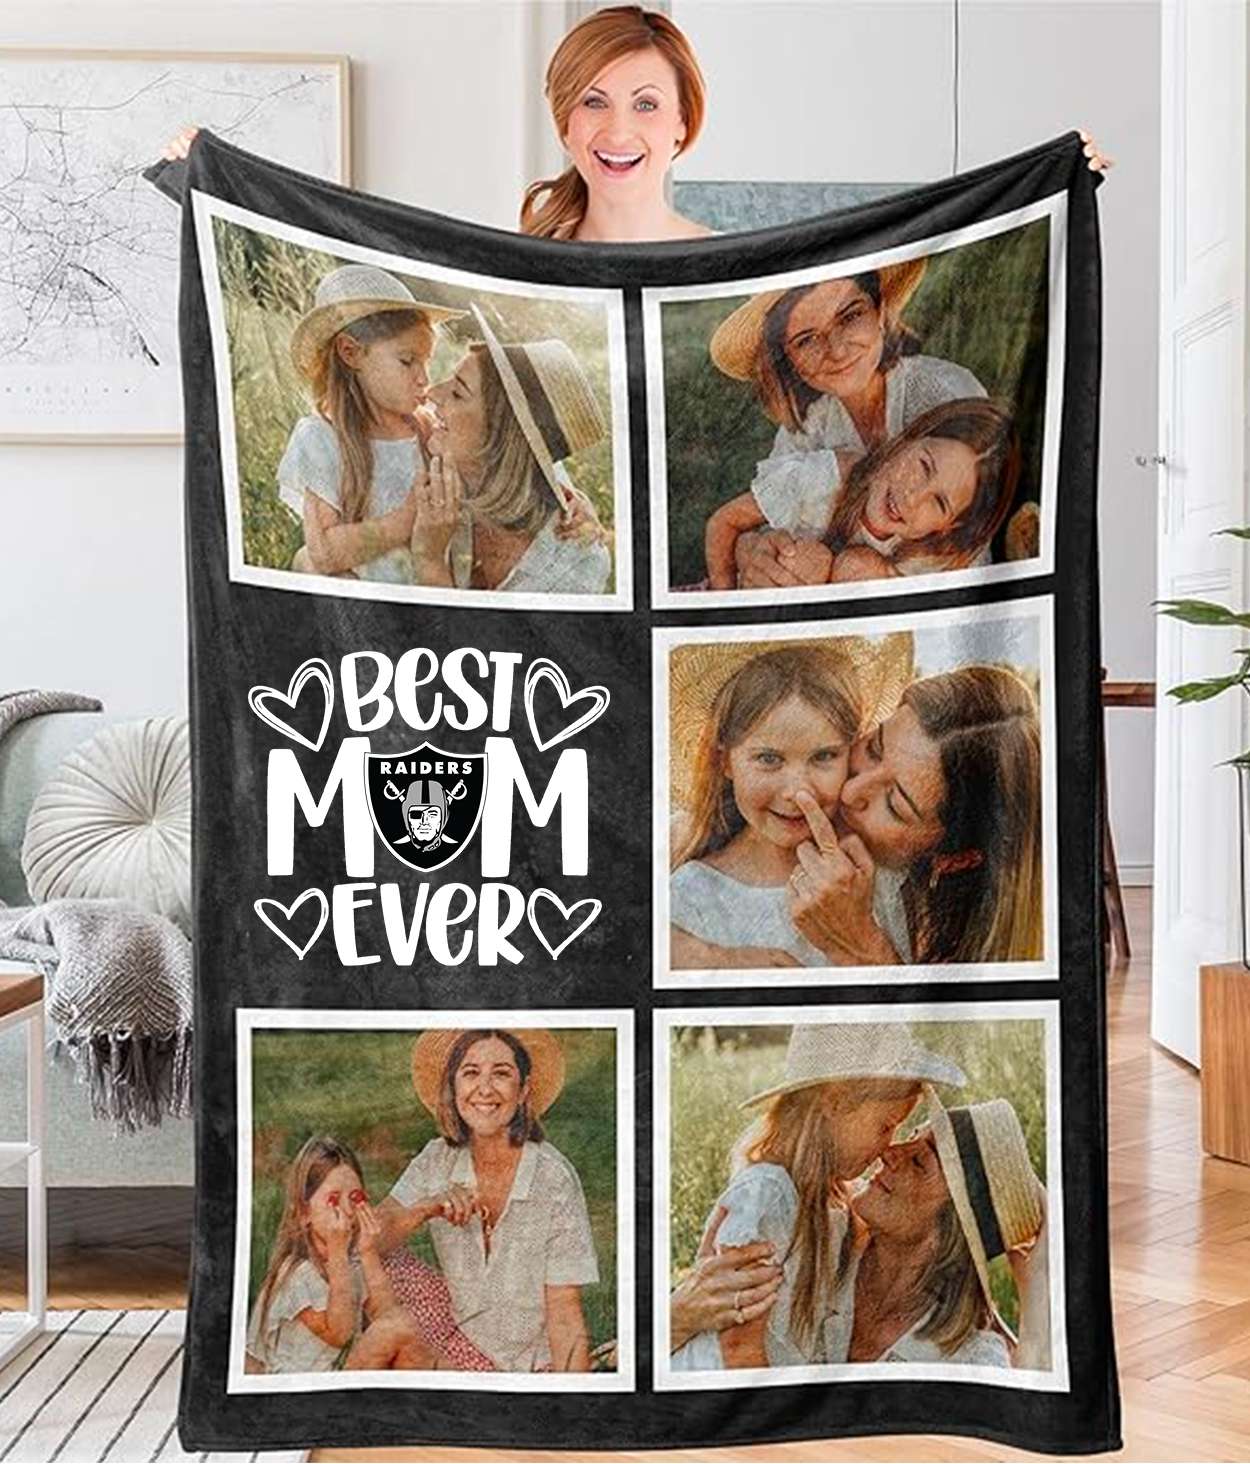 Best Mom Ever - Custom NFL Las Vegas Raiders Blankets with Pictures for Mother's Day Gift